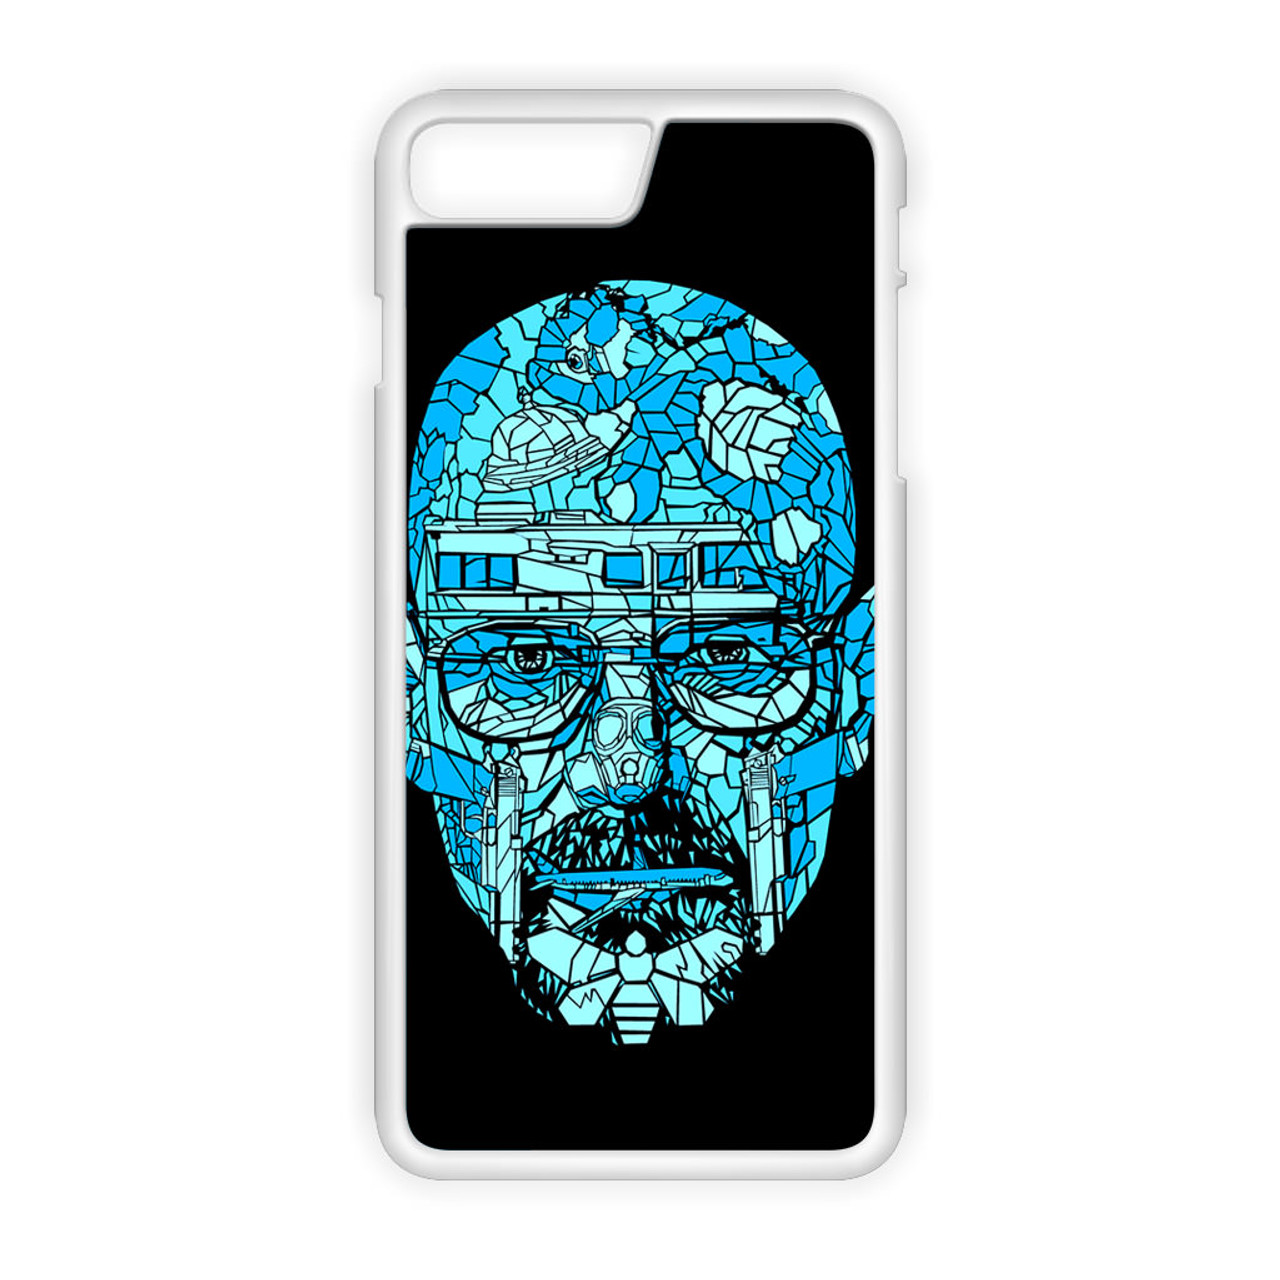 Breaking Bad All Bad Things iPhone 7 Plus Case - CASESHUNTER